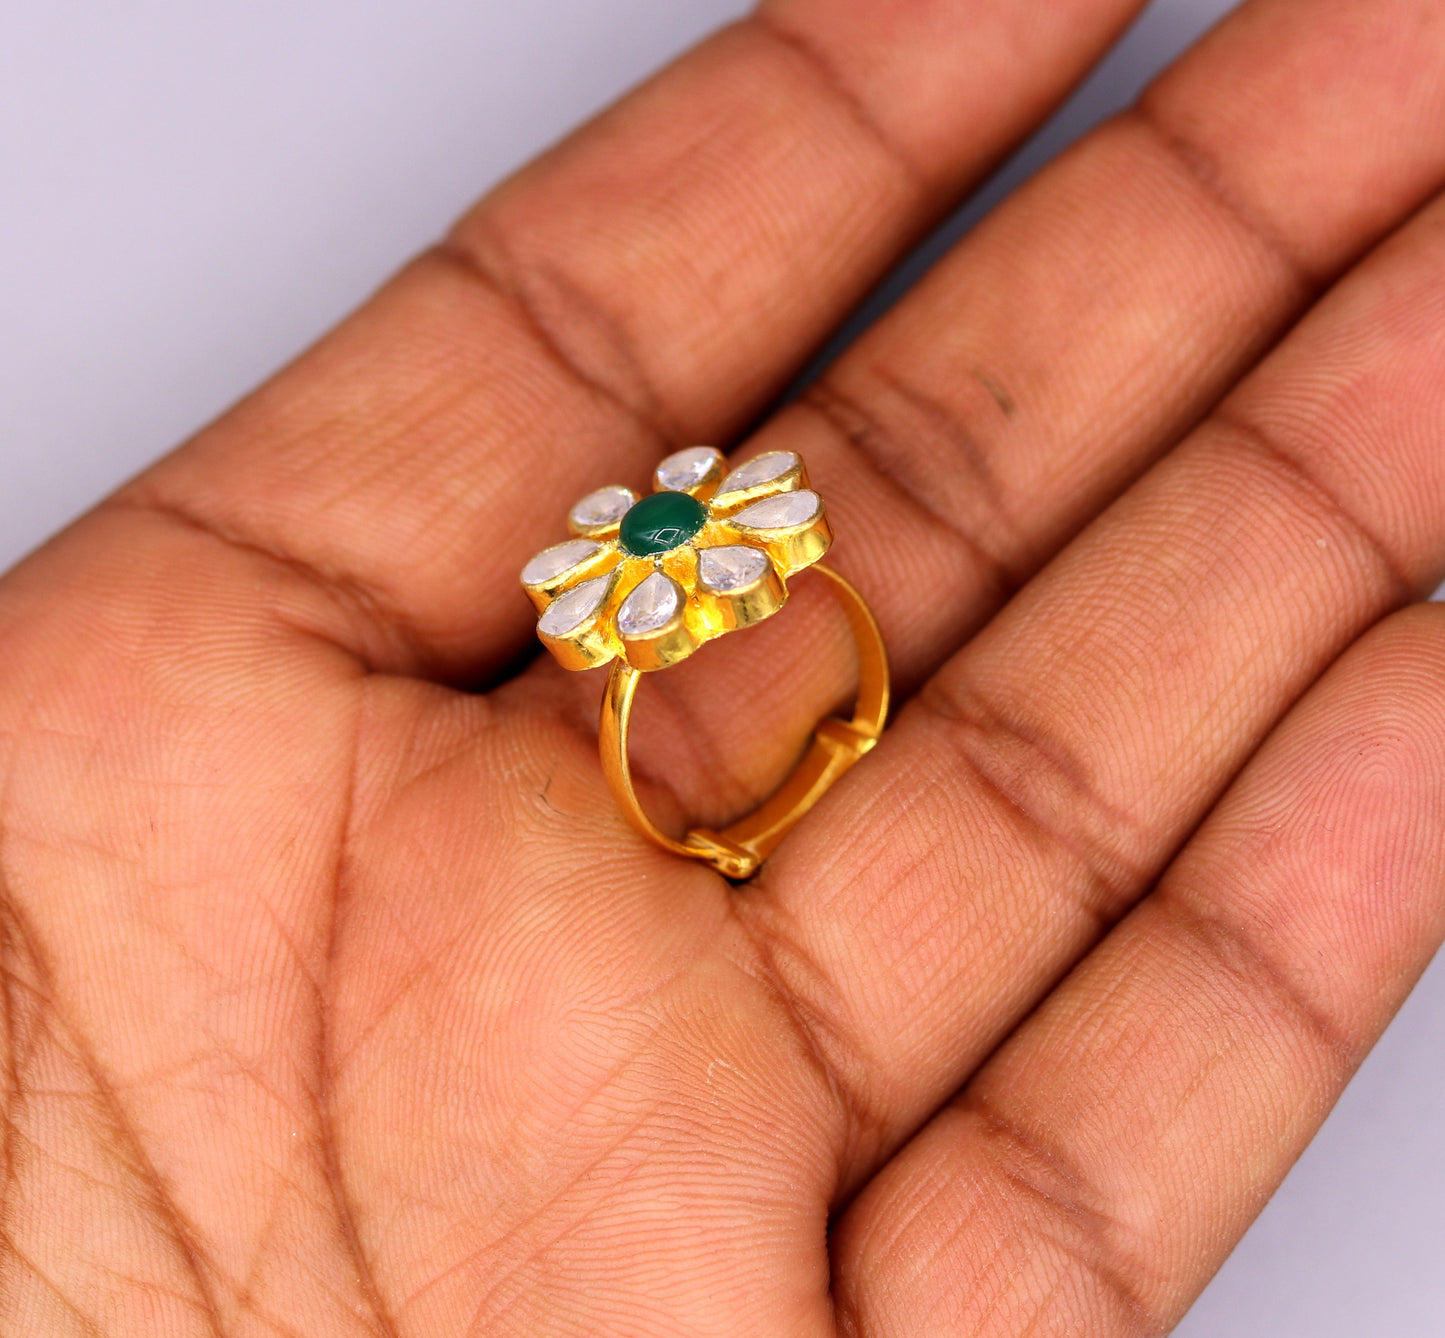 22kt yellow gold handmade fabulous adjustable ring band certified hallmarked flower shape indian simple jewelry - TRIBAL ORNAMENTS